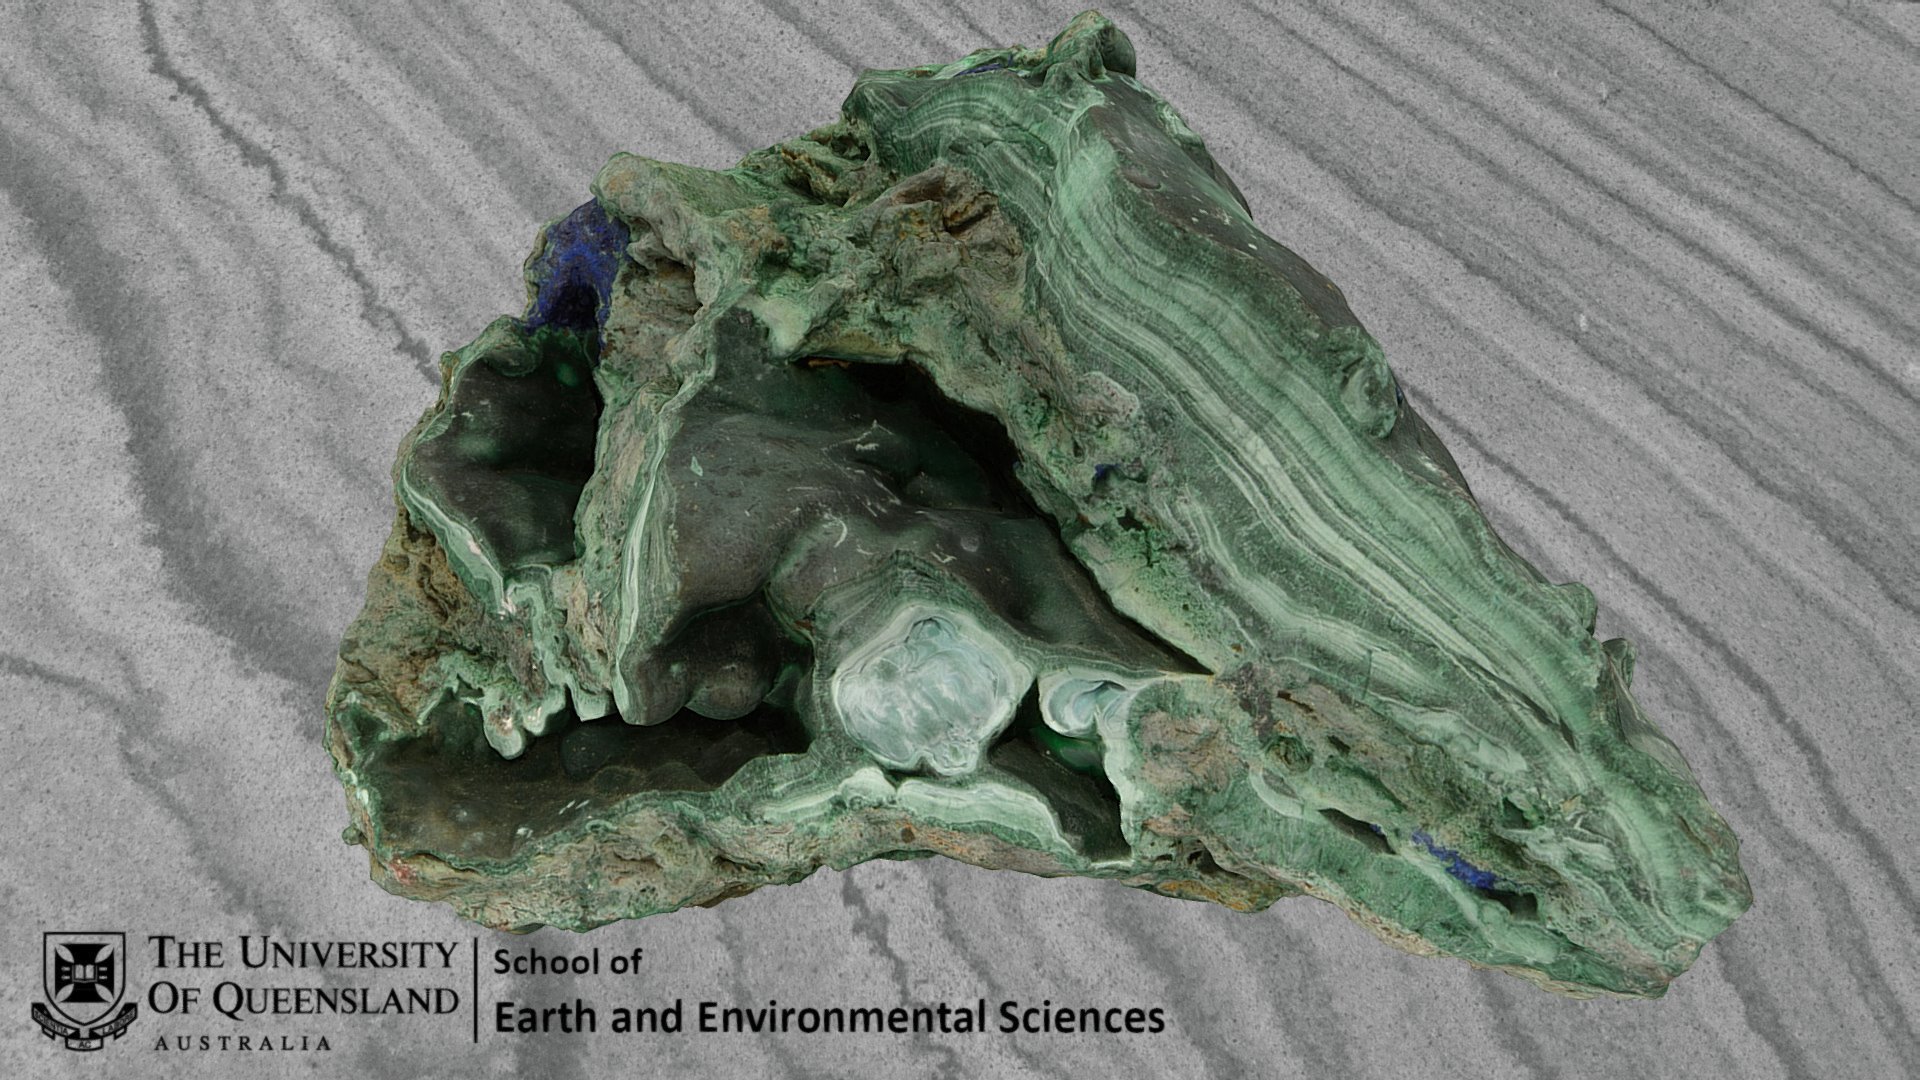 http://www.mindat.org/min-2550.html  - Malachite (with minor Azurite) - 3D model by nate_siddle (@nate_sid) 3d model